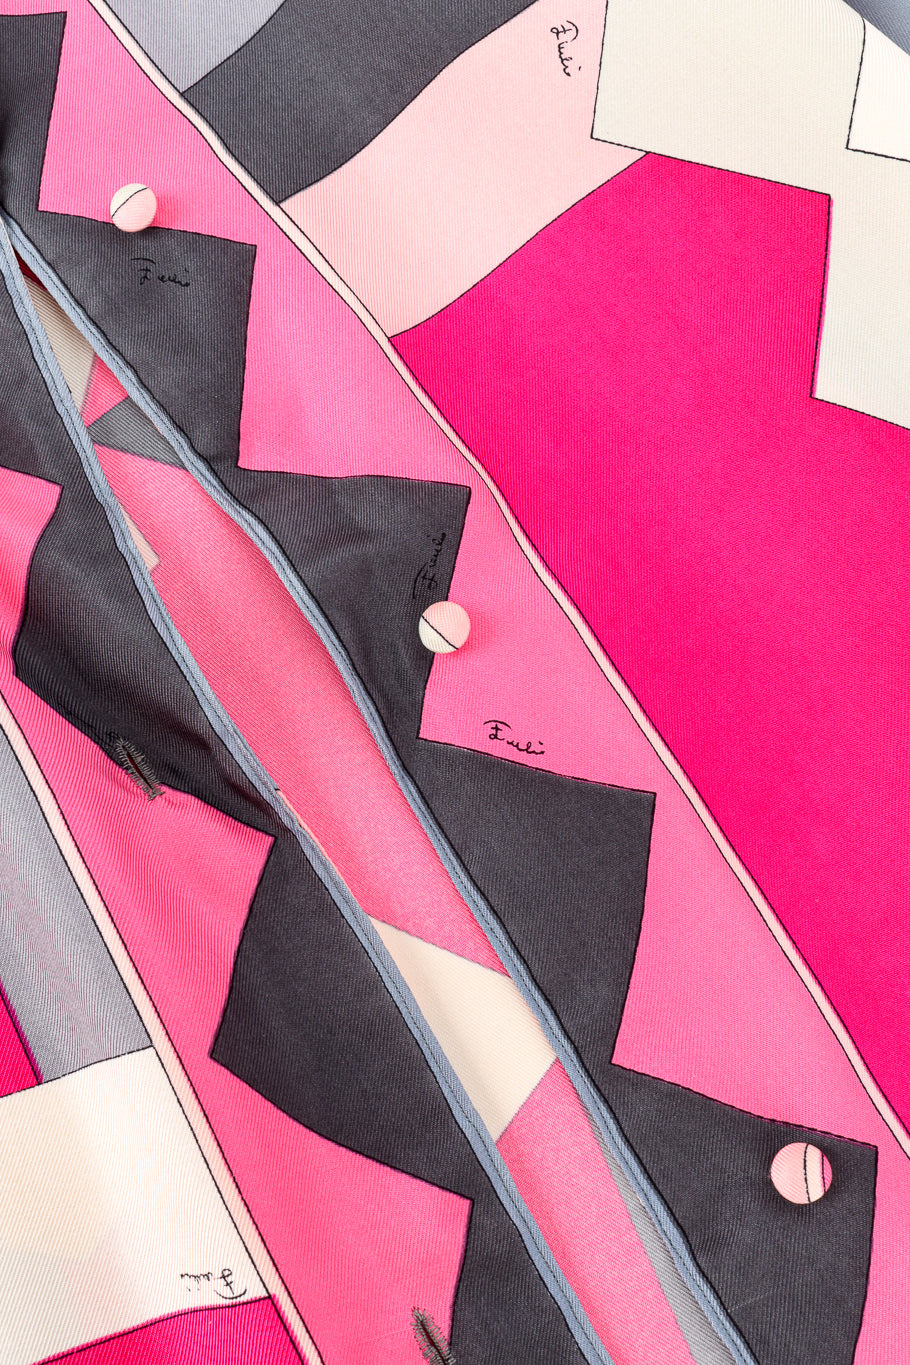 Vintage Emilio Pucci geometric pink patterned blouse close up detail of the graphic print and fabric buttons @Recess LA